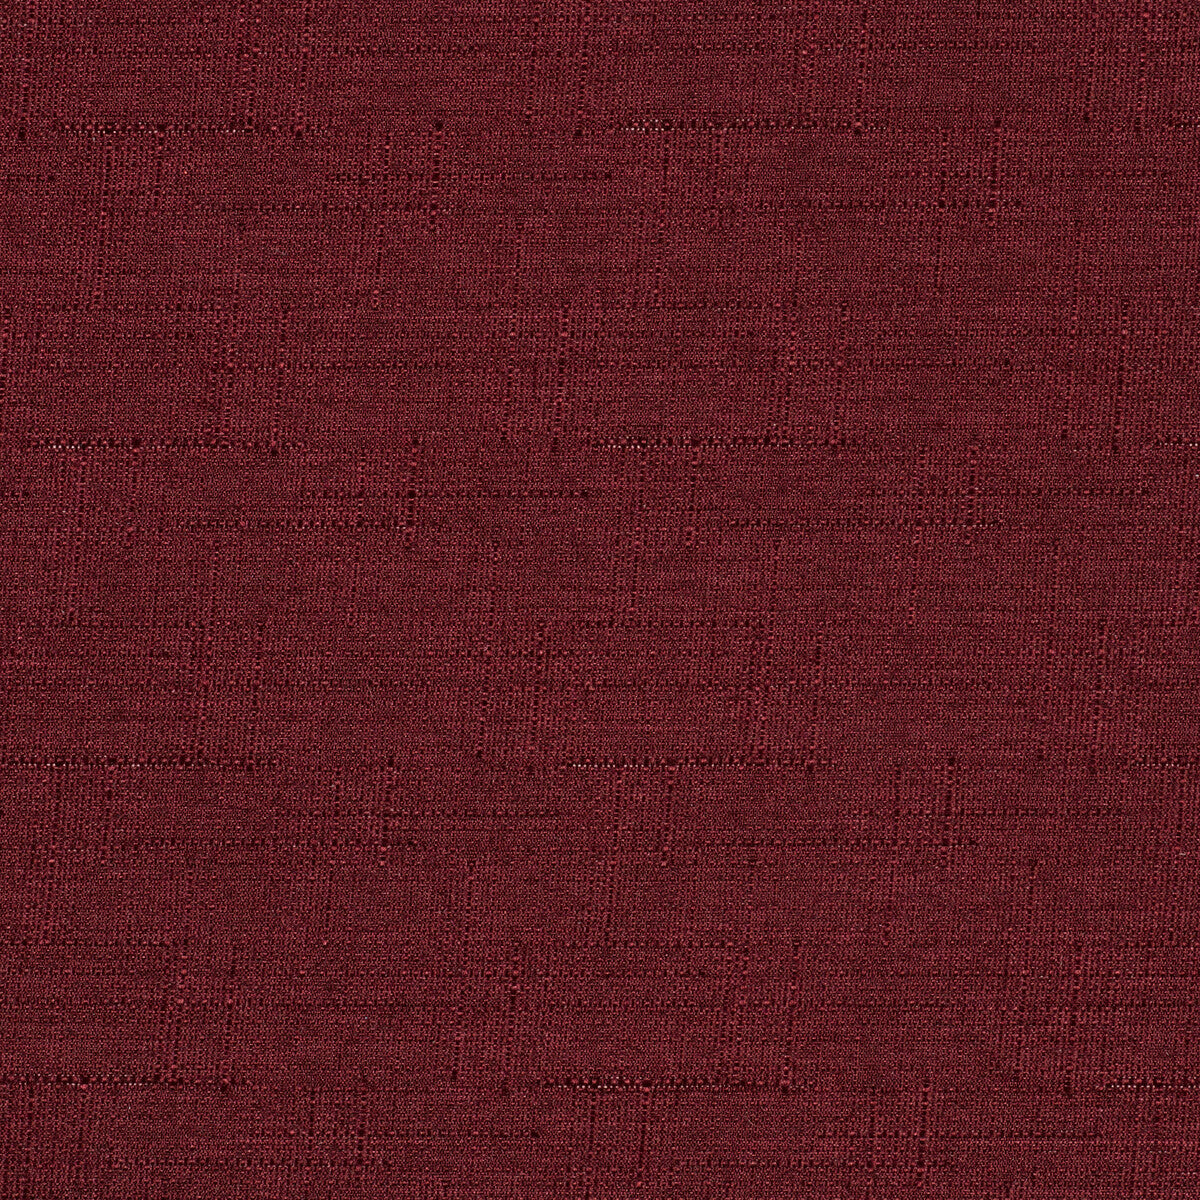 Kravet Contract fabric in 4317-9 color - pattern 4317.9.0 - by Kravet Contract